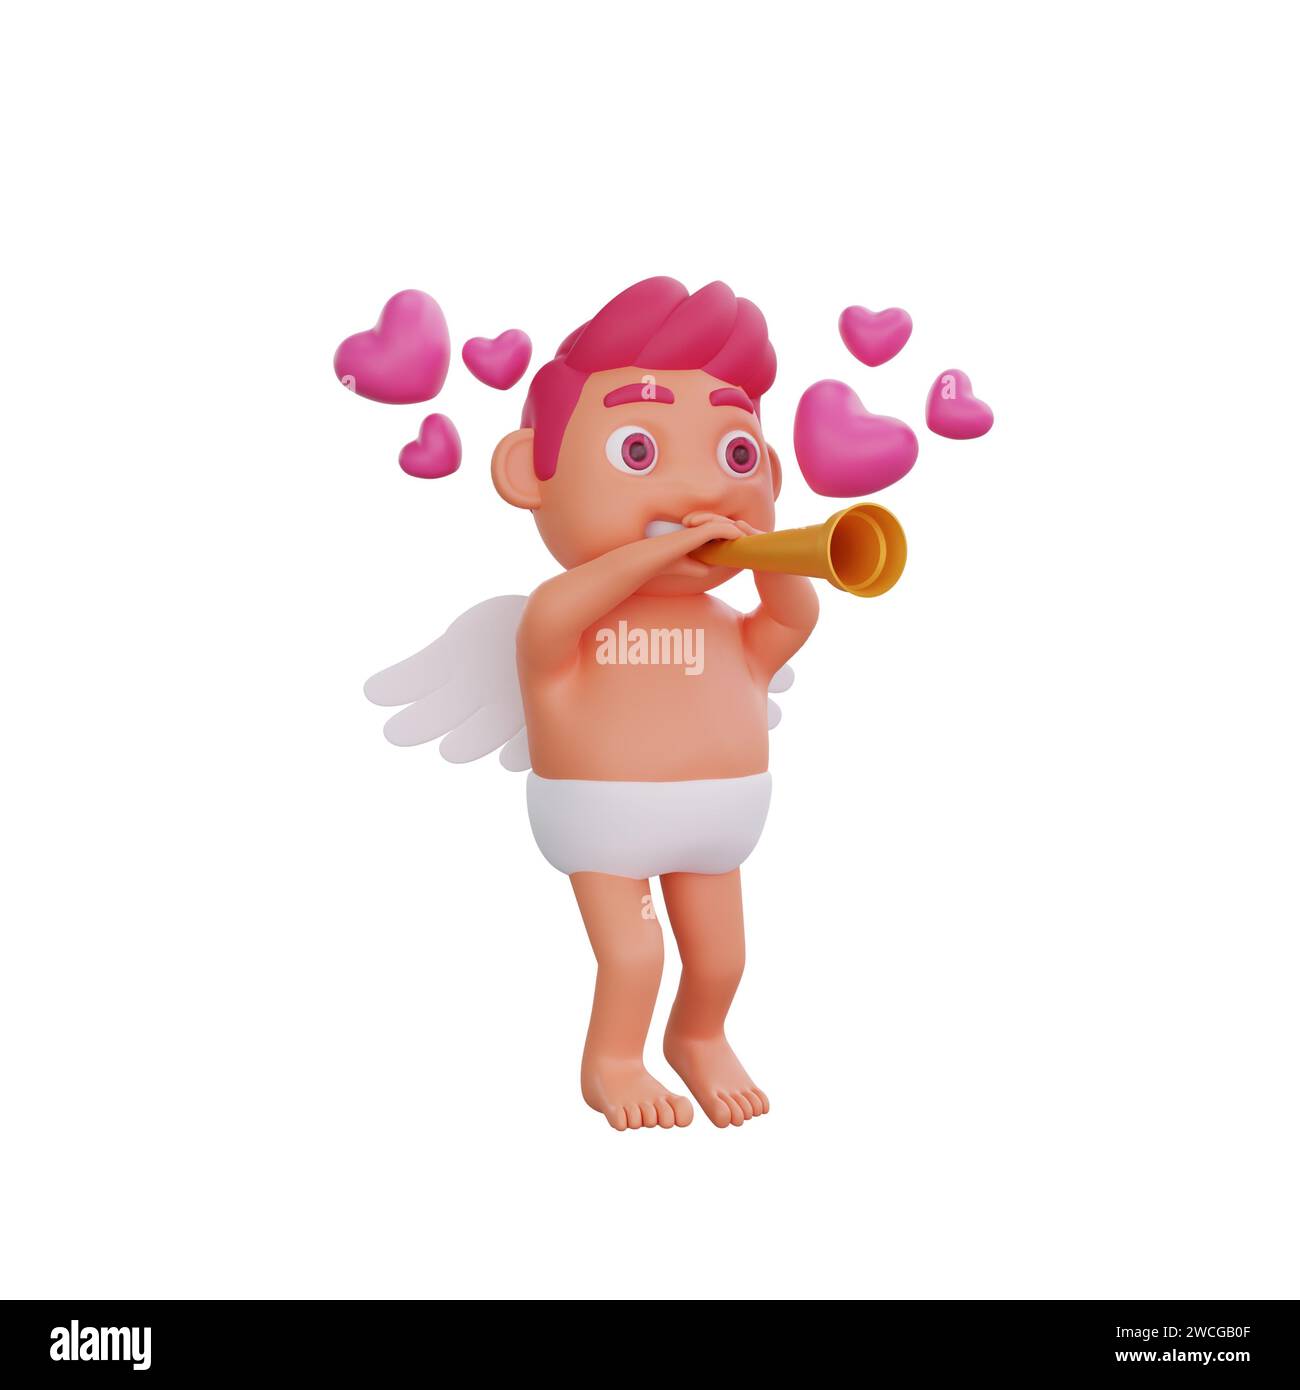 3D illustration of Valentine Cupid character playing a golden trumpet, sending out waves of pink hearts, perfect for Valentine or love themed projects Stock Photo